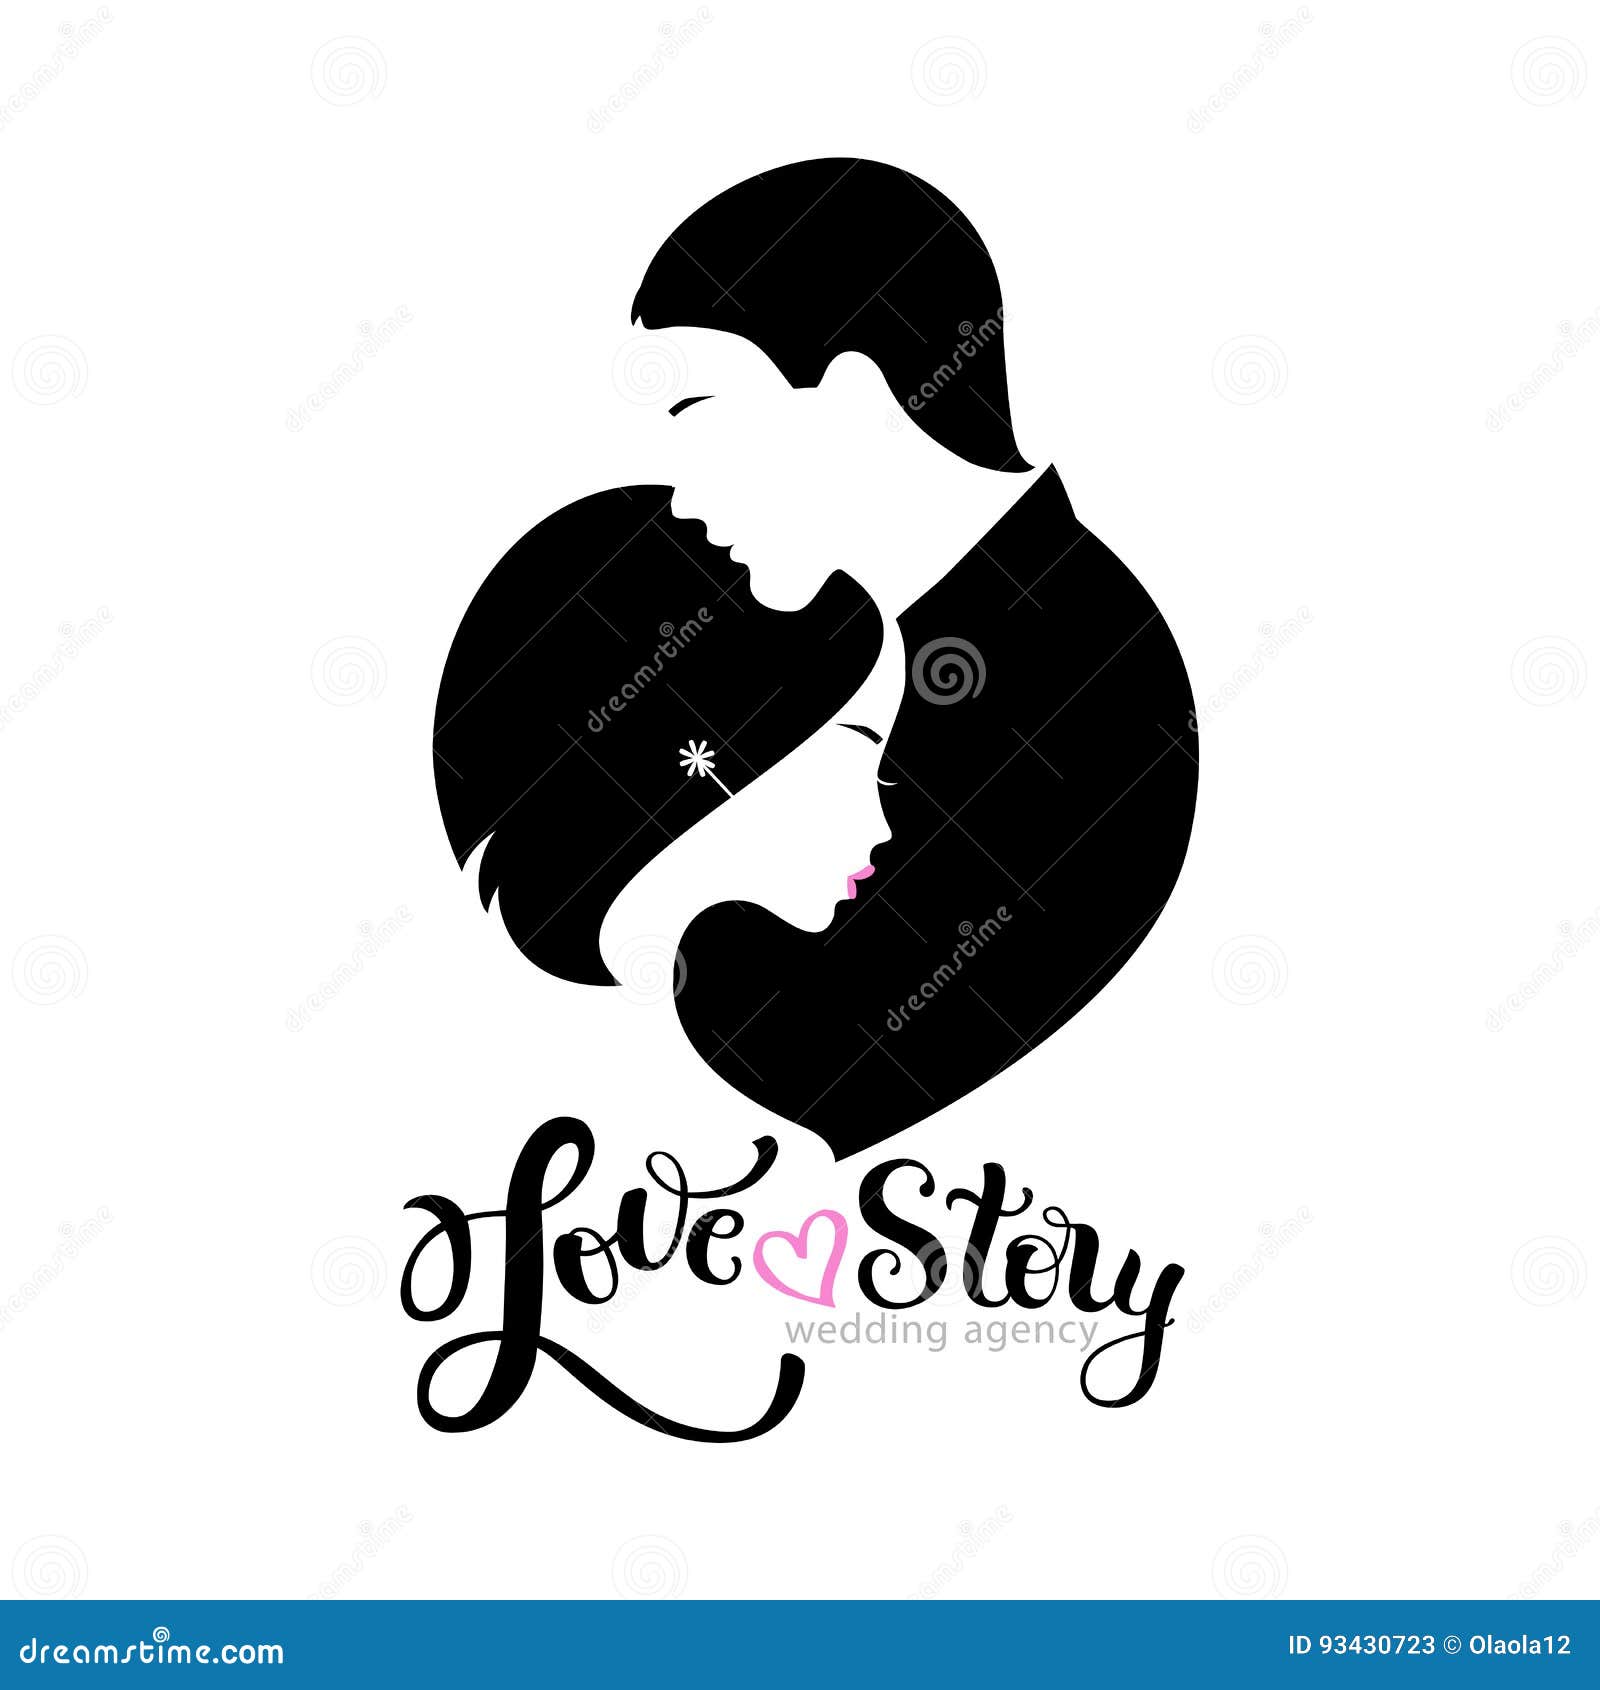 Wedding Logo With Silhouettes Bride And Groom Stock Vector